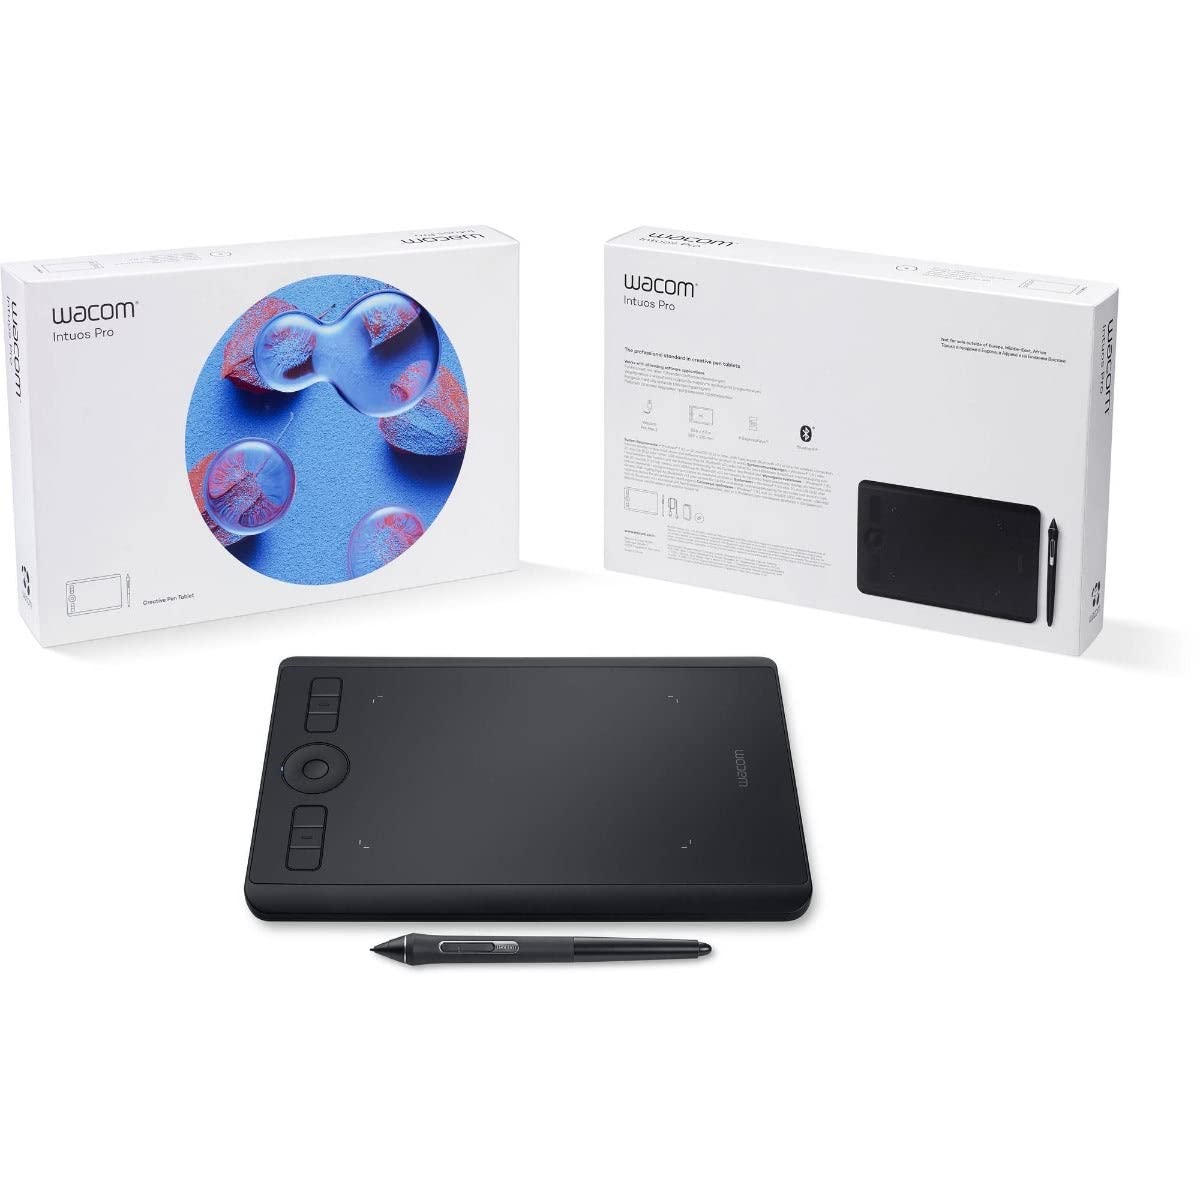 Wacom Intuos Pro Digital Graphic Drawing Tablet for Mac or PC, Small (PTH-460/K0-CX)